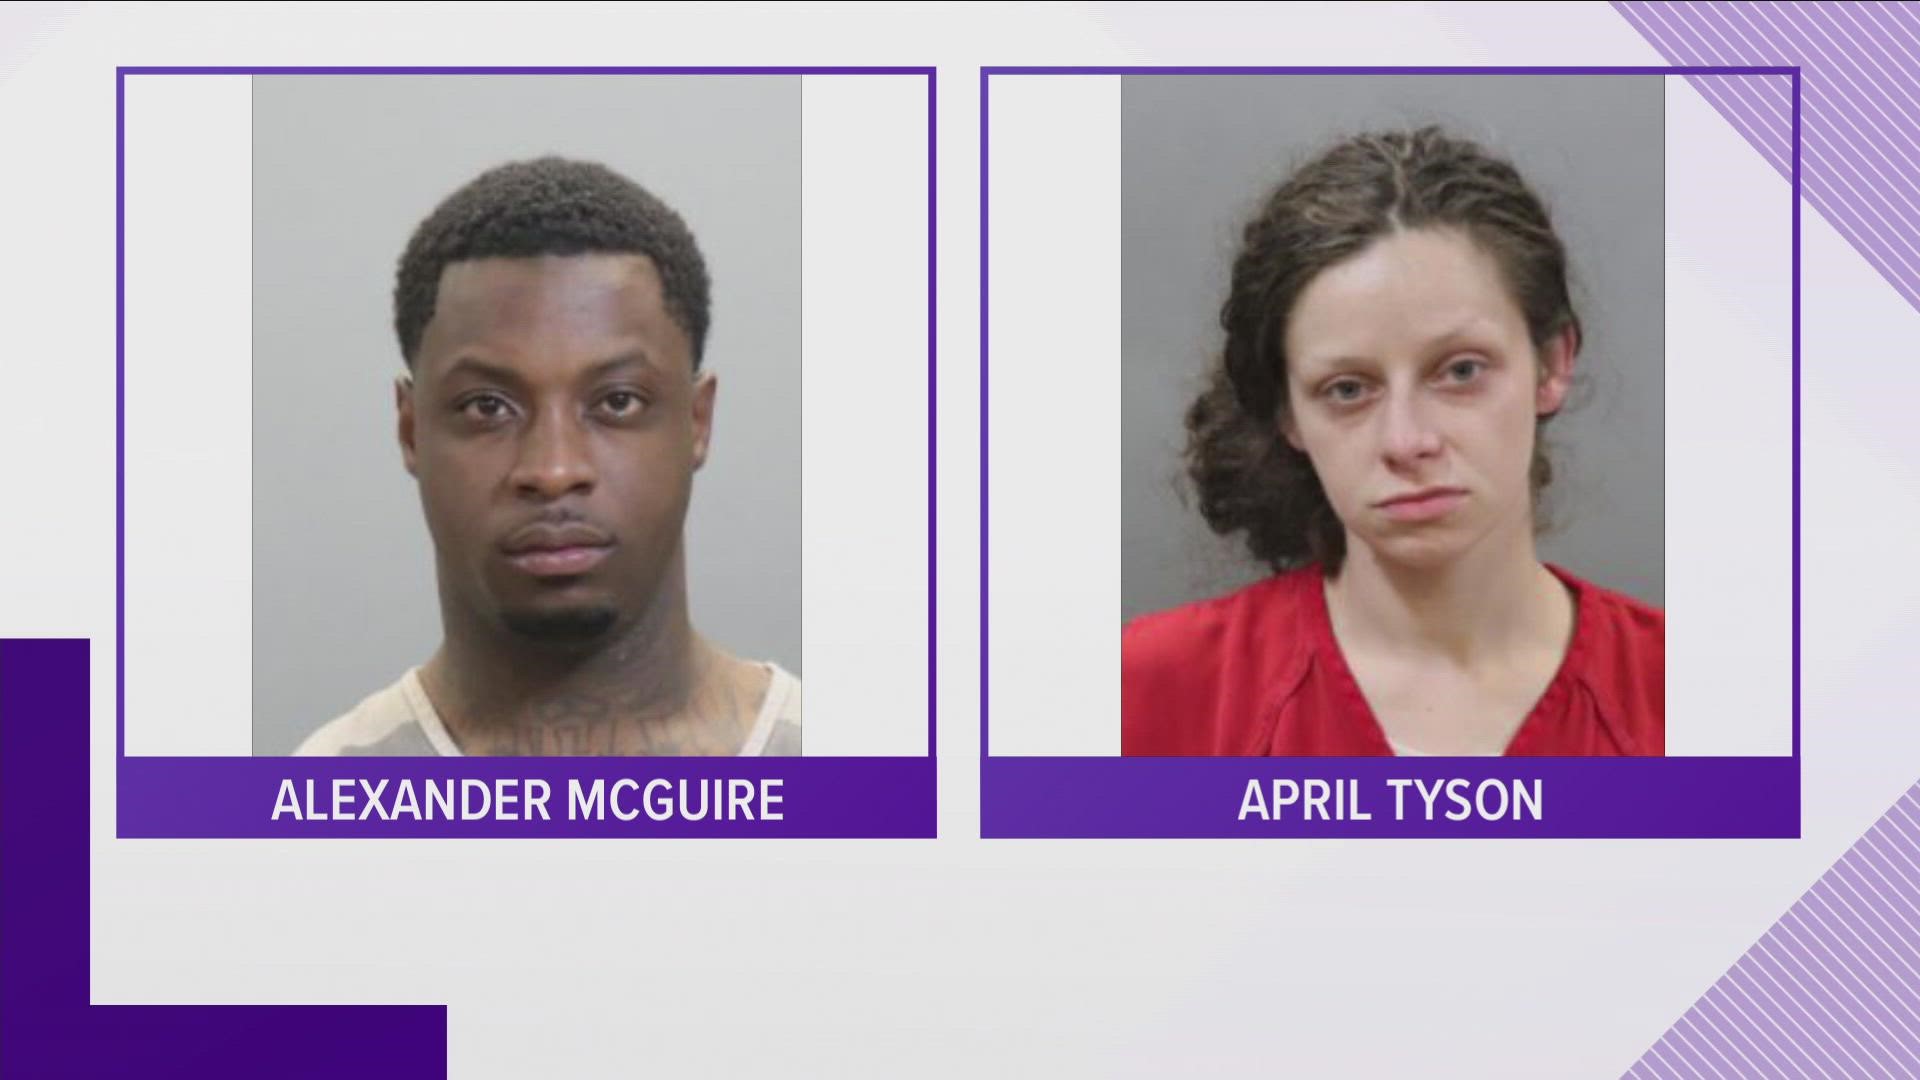 Police said a 27-year-old man and a 28-year-old woman were arrested after a camera alerted them to a car that was stolen from Middle Tennessee State University.